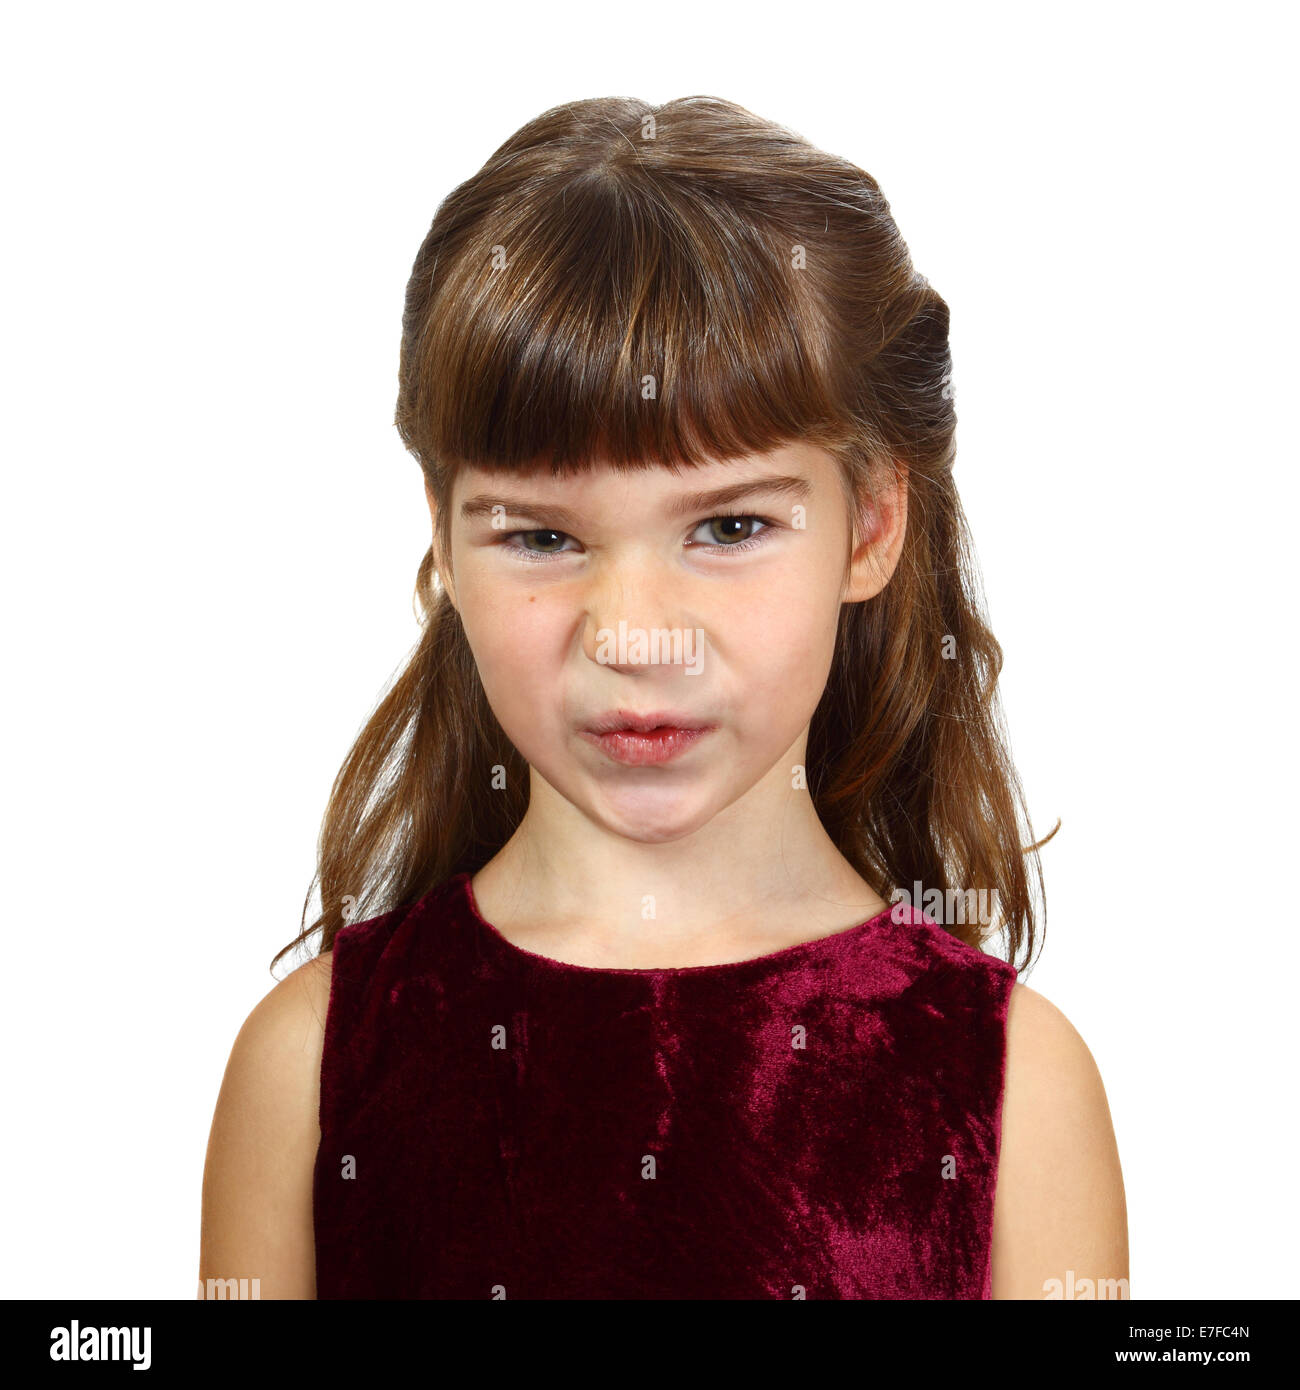 Little girl with a scornful glance. Portrait isolated on white background Stock Photo